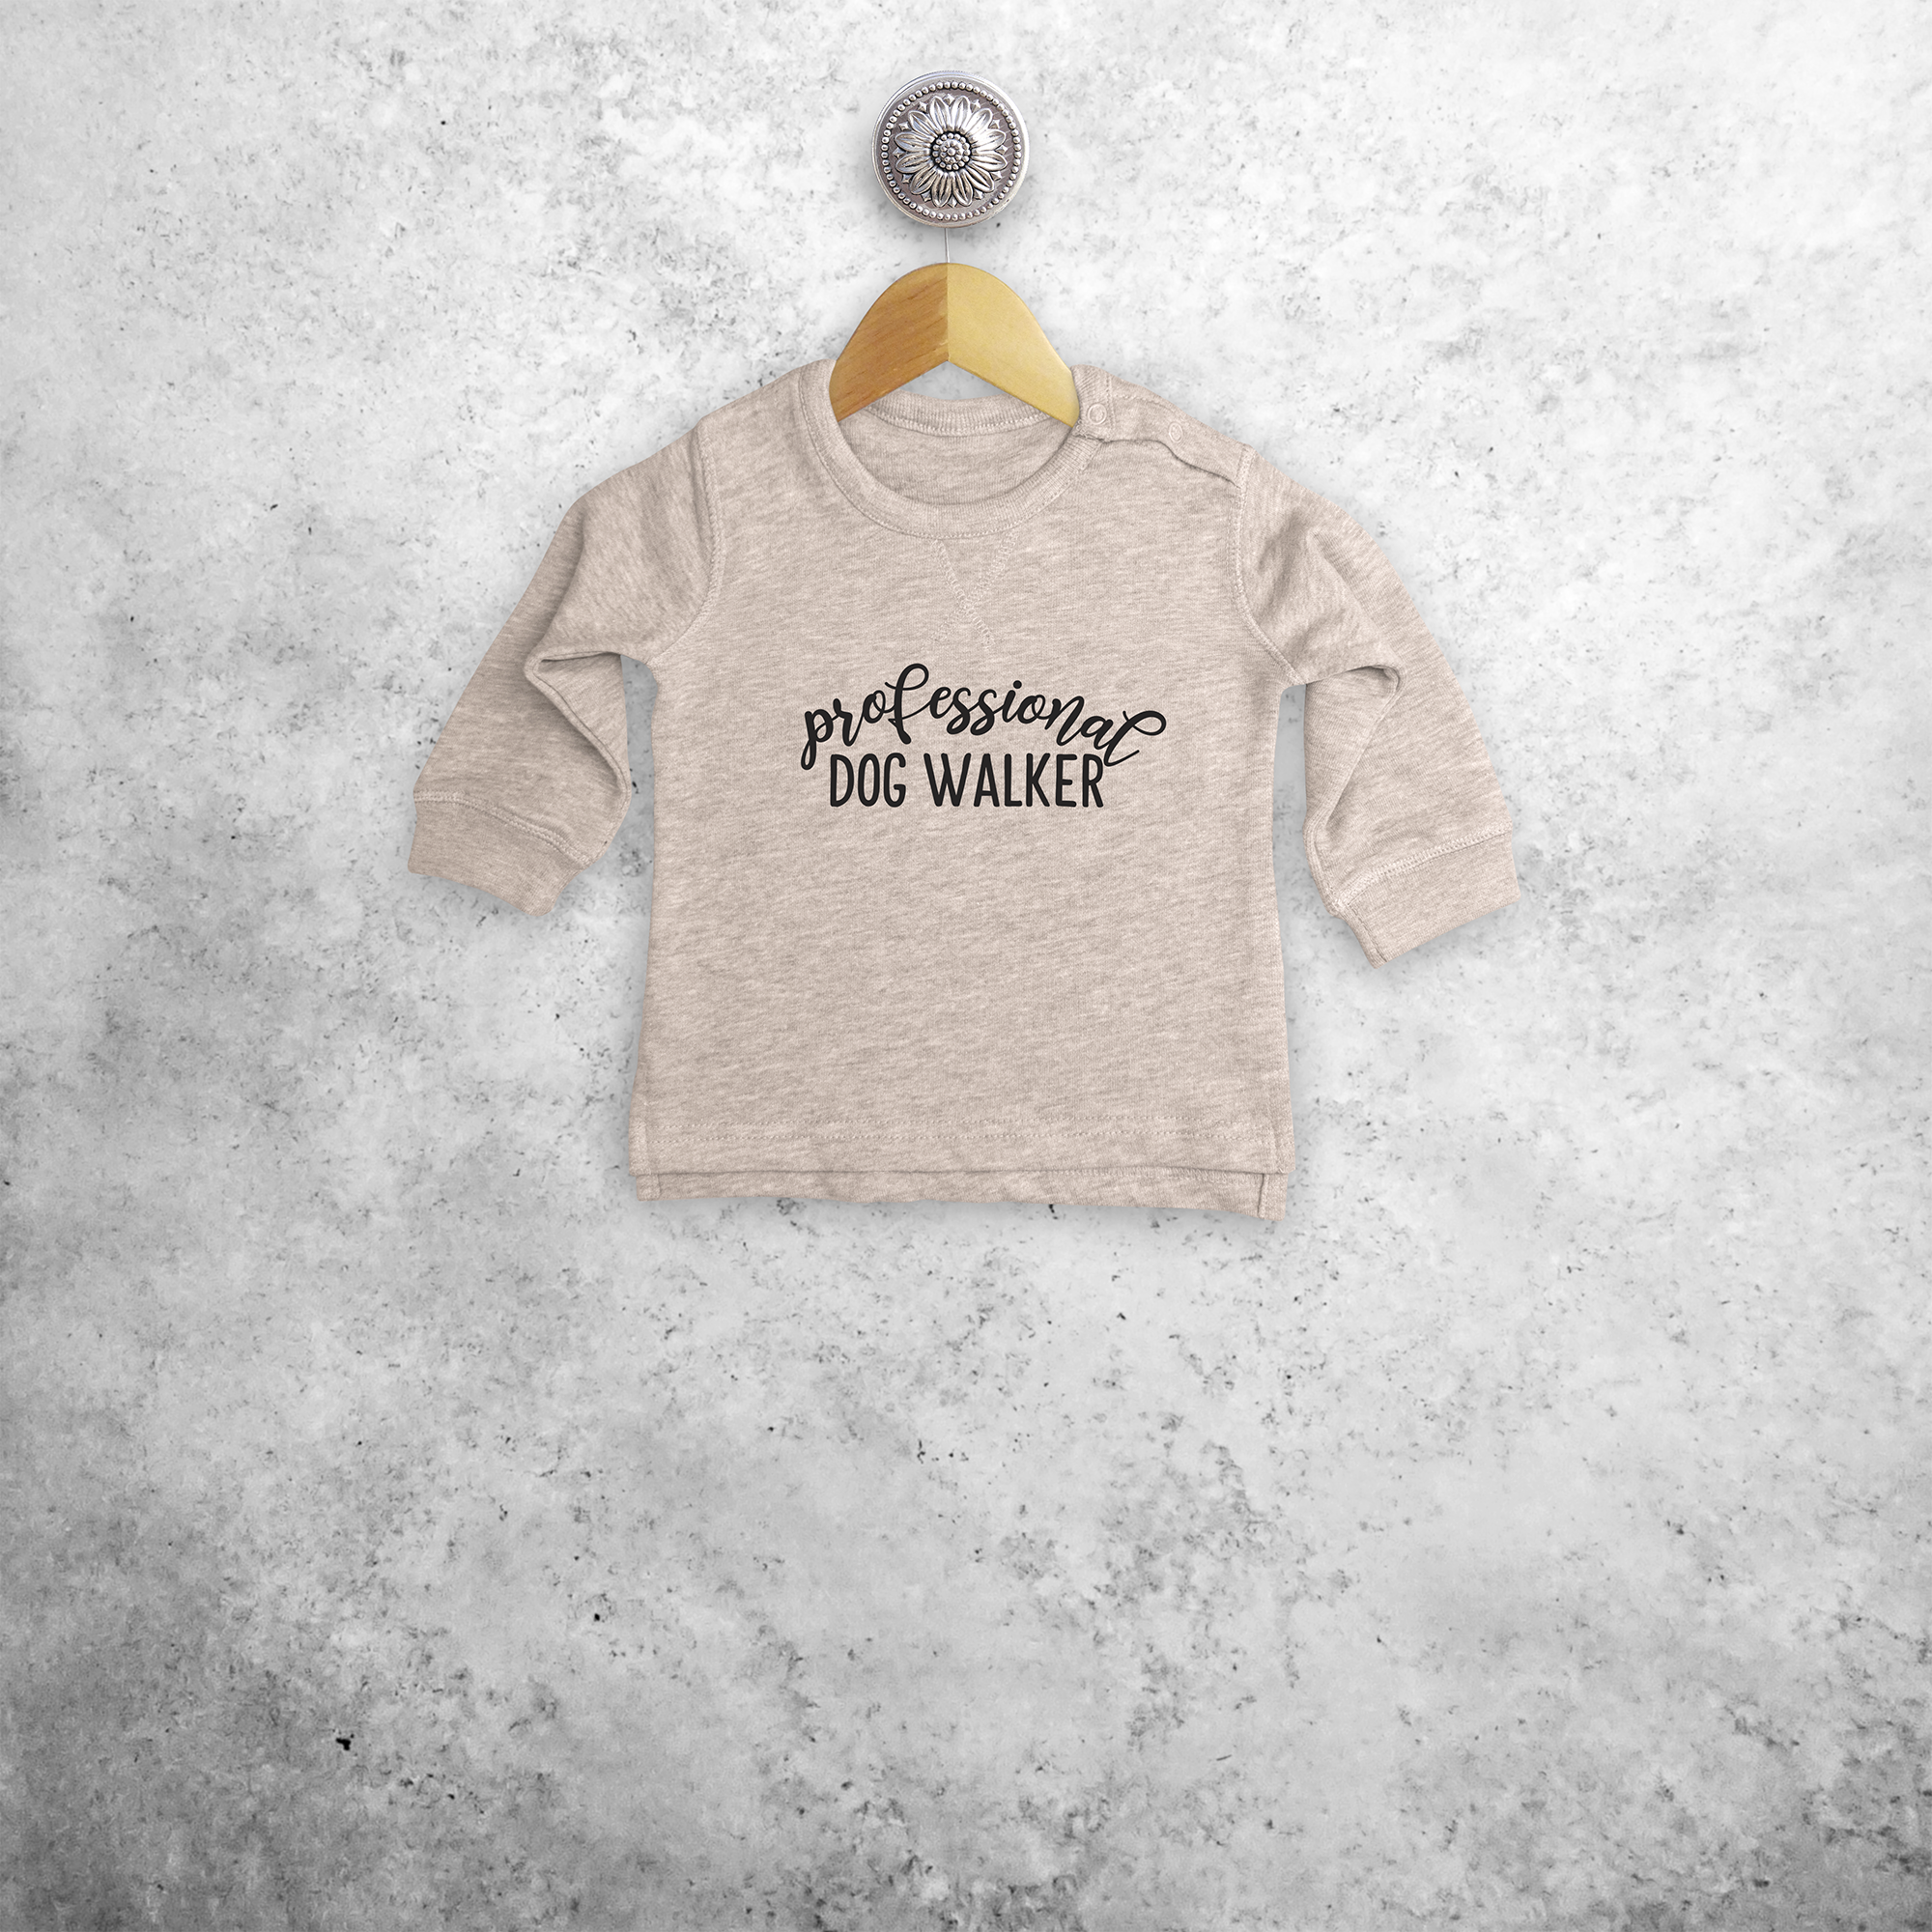 'Professional dog walker' baby sweater